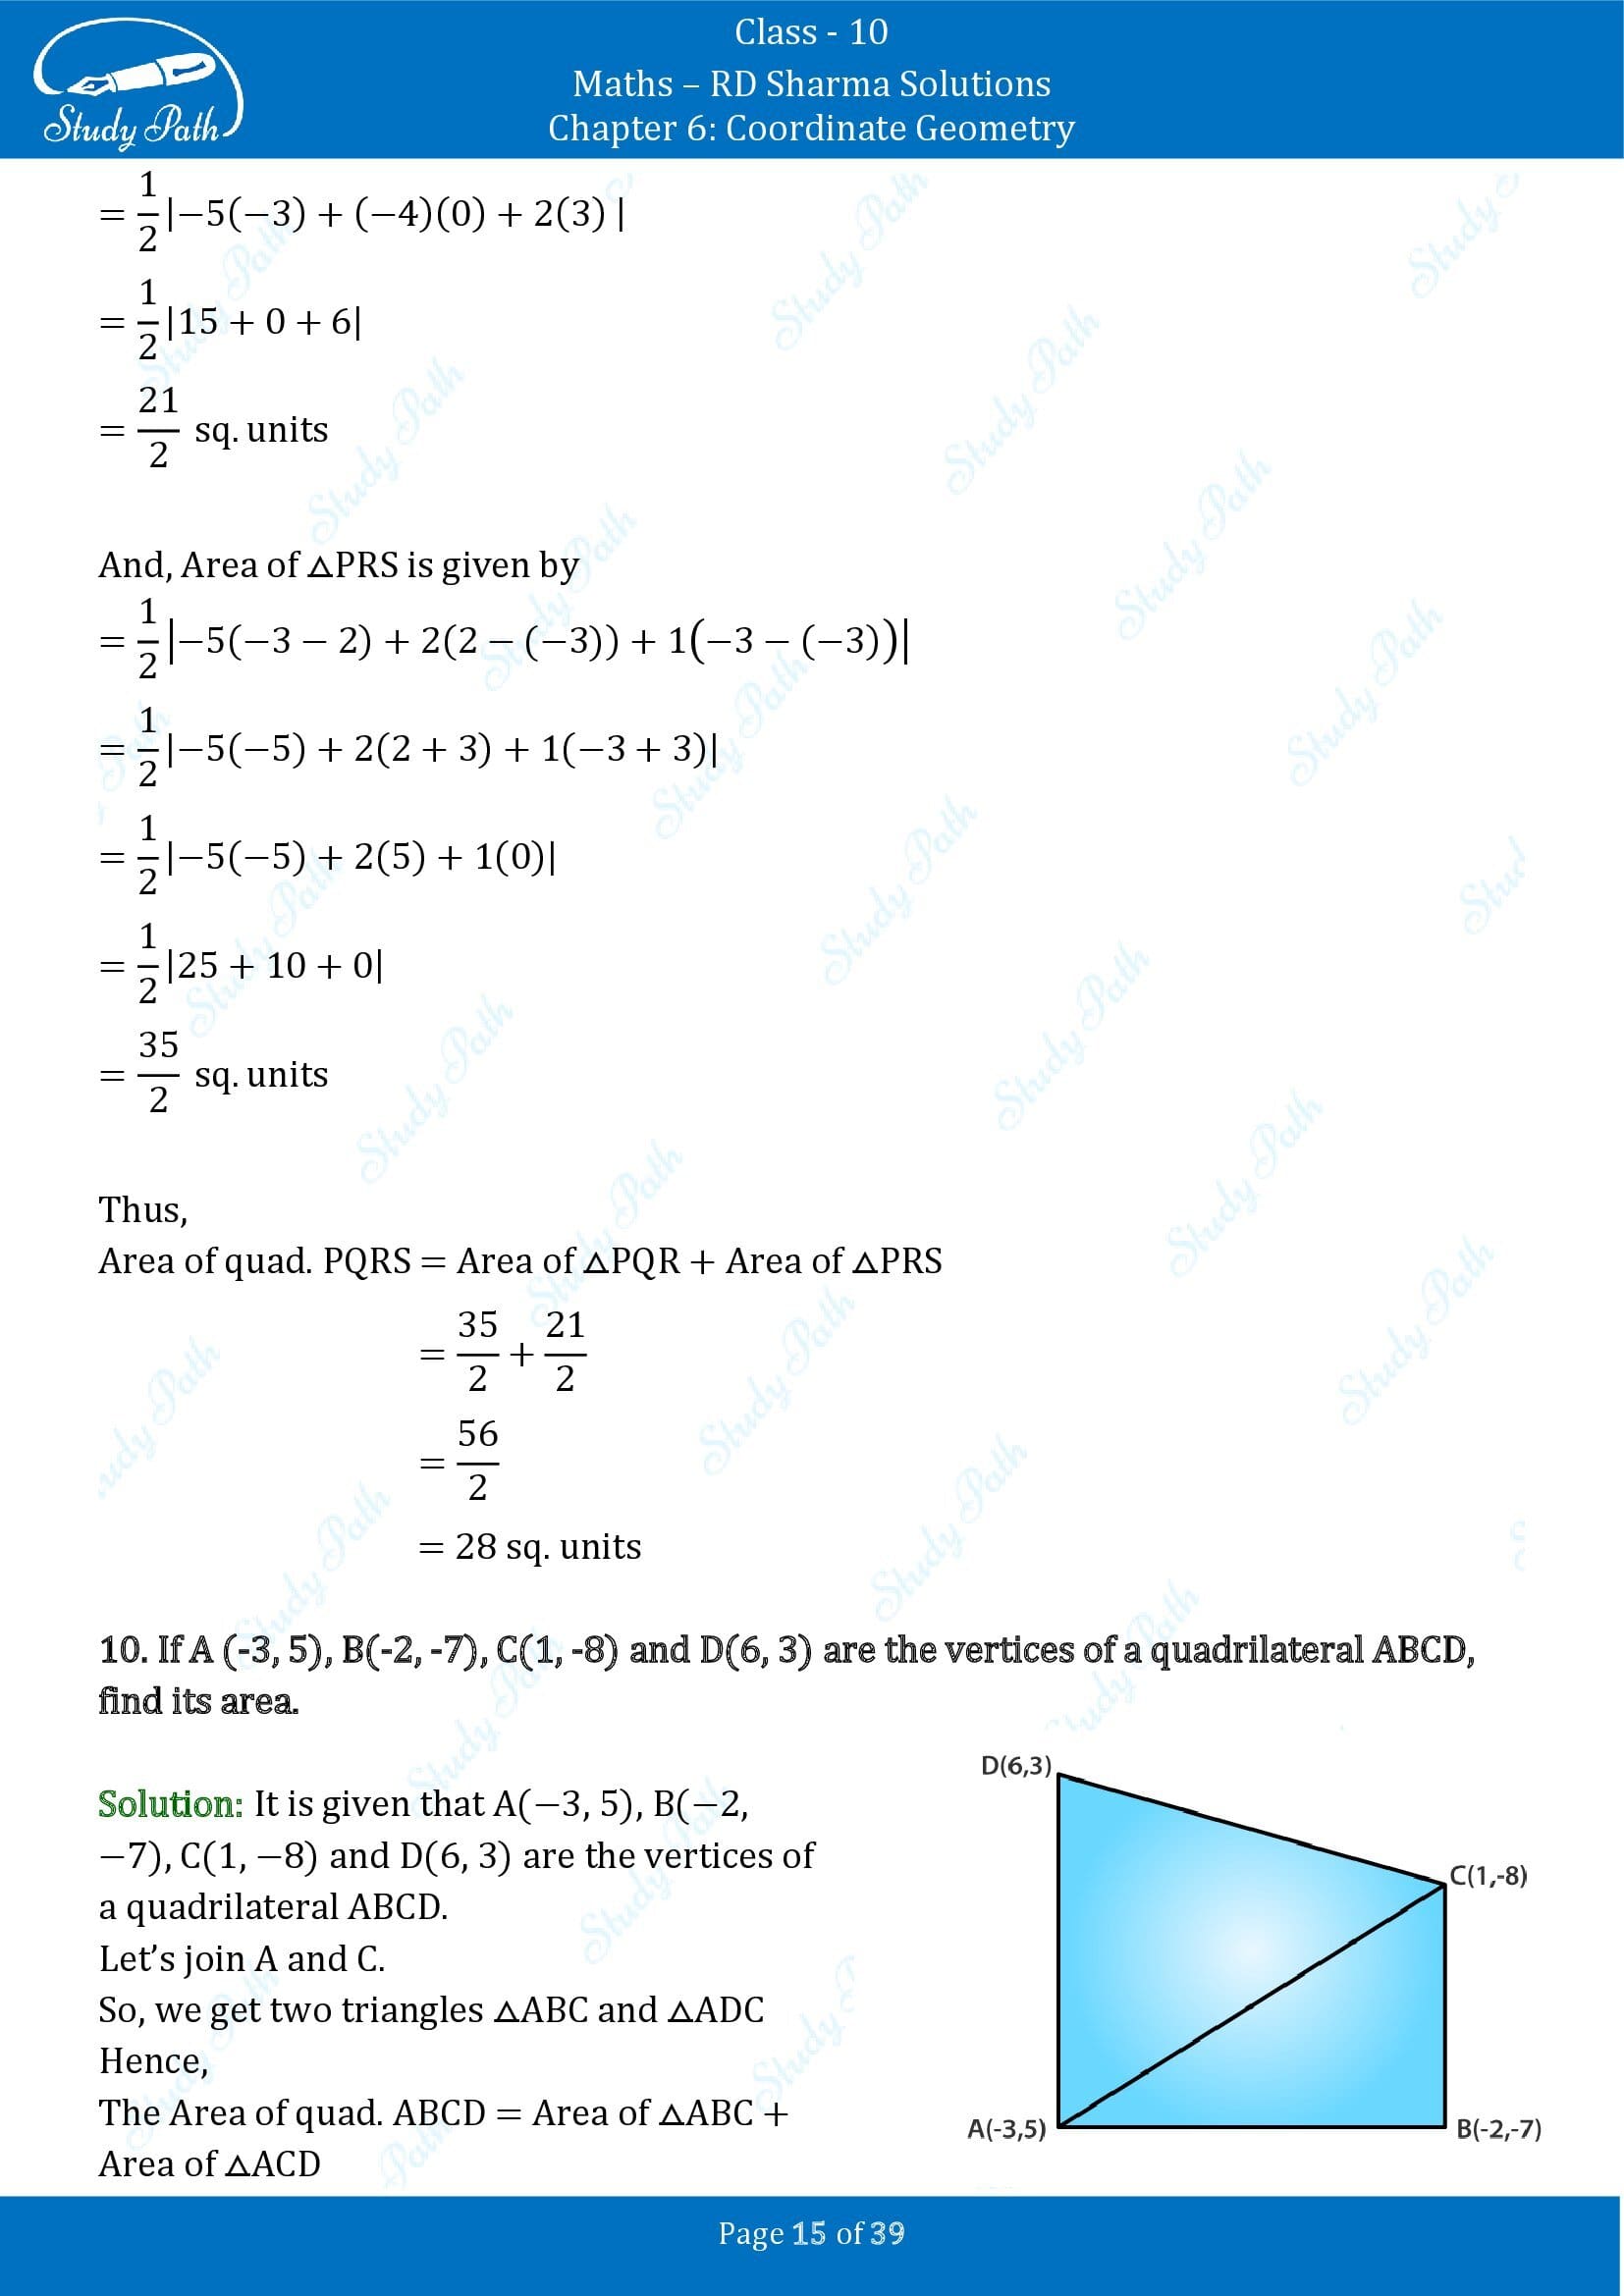 RD Sharma Solutions Class 10 Chapter 6 Coordinate Geometry Exercise 6.5 0015